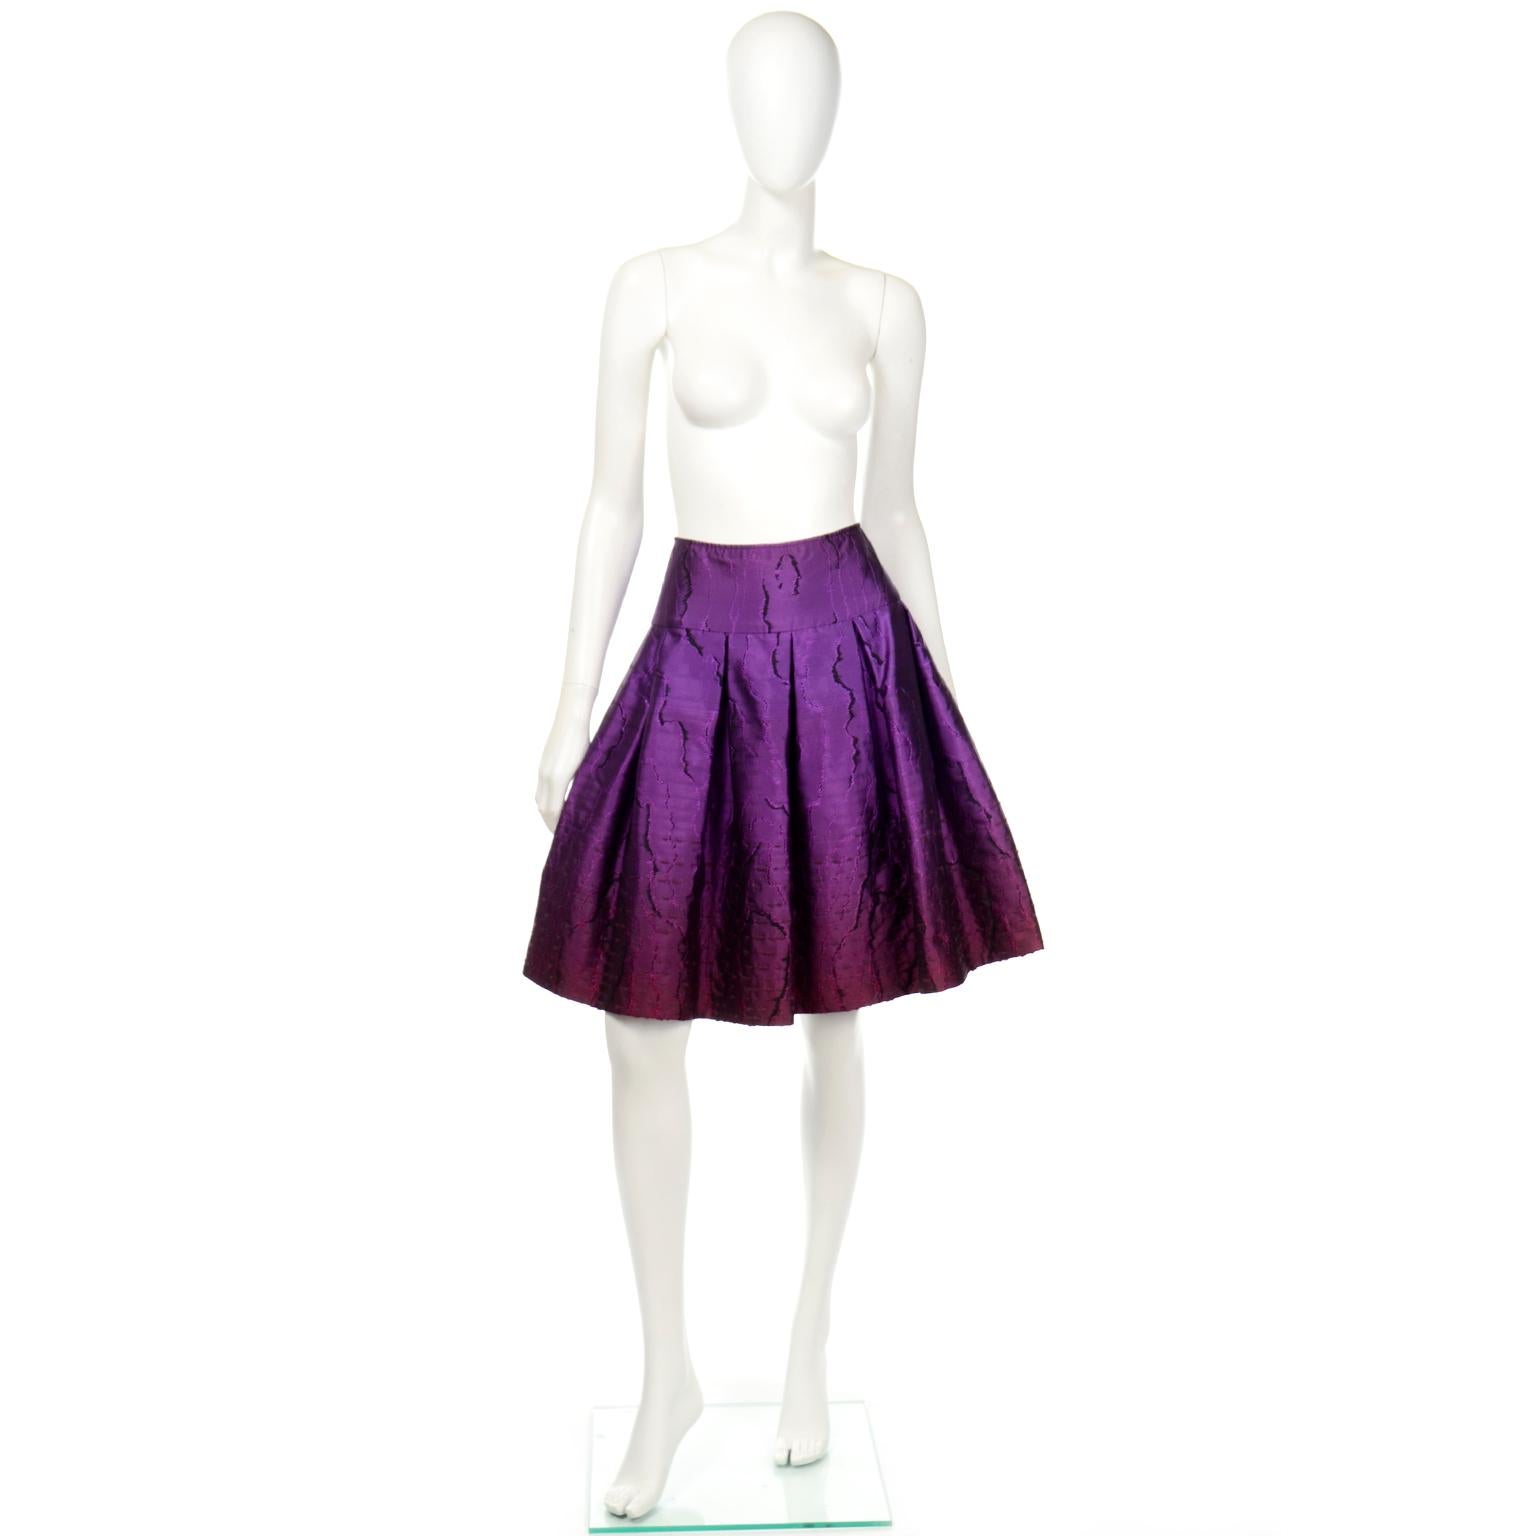 Oscar de la Renta Fall 2008 Purple Textured Skirt Runway Documented In Excellent Condition For Sale In Portland, OR